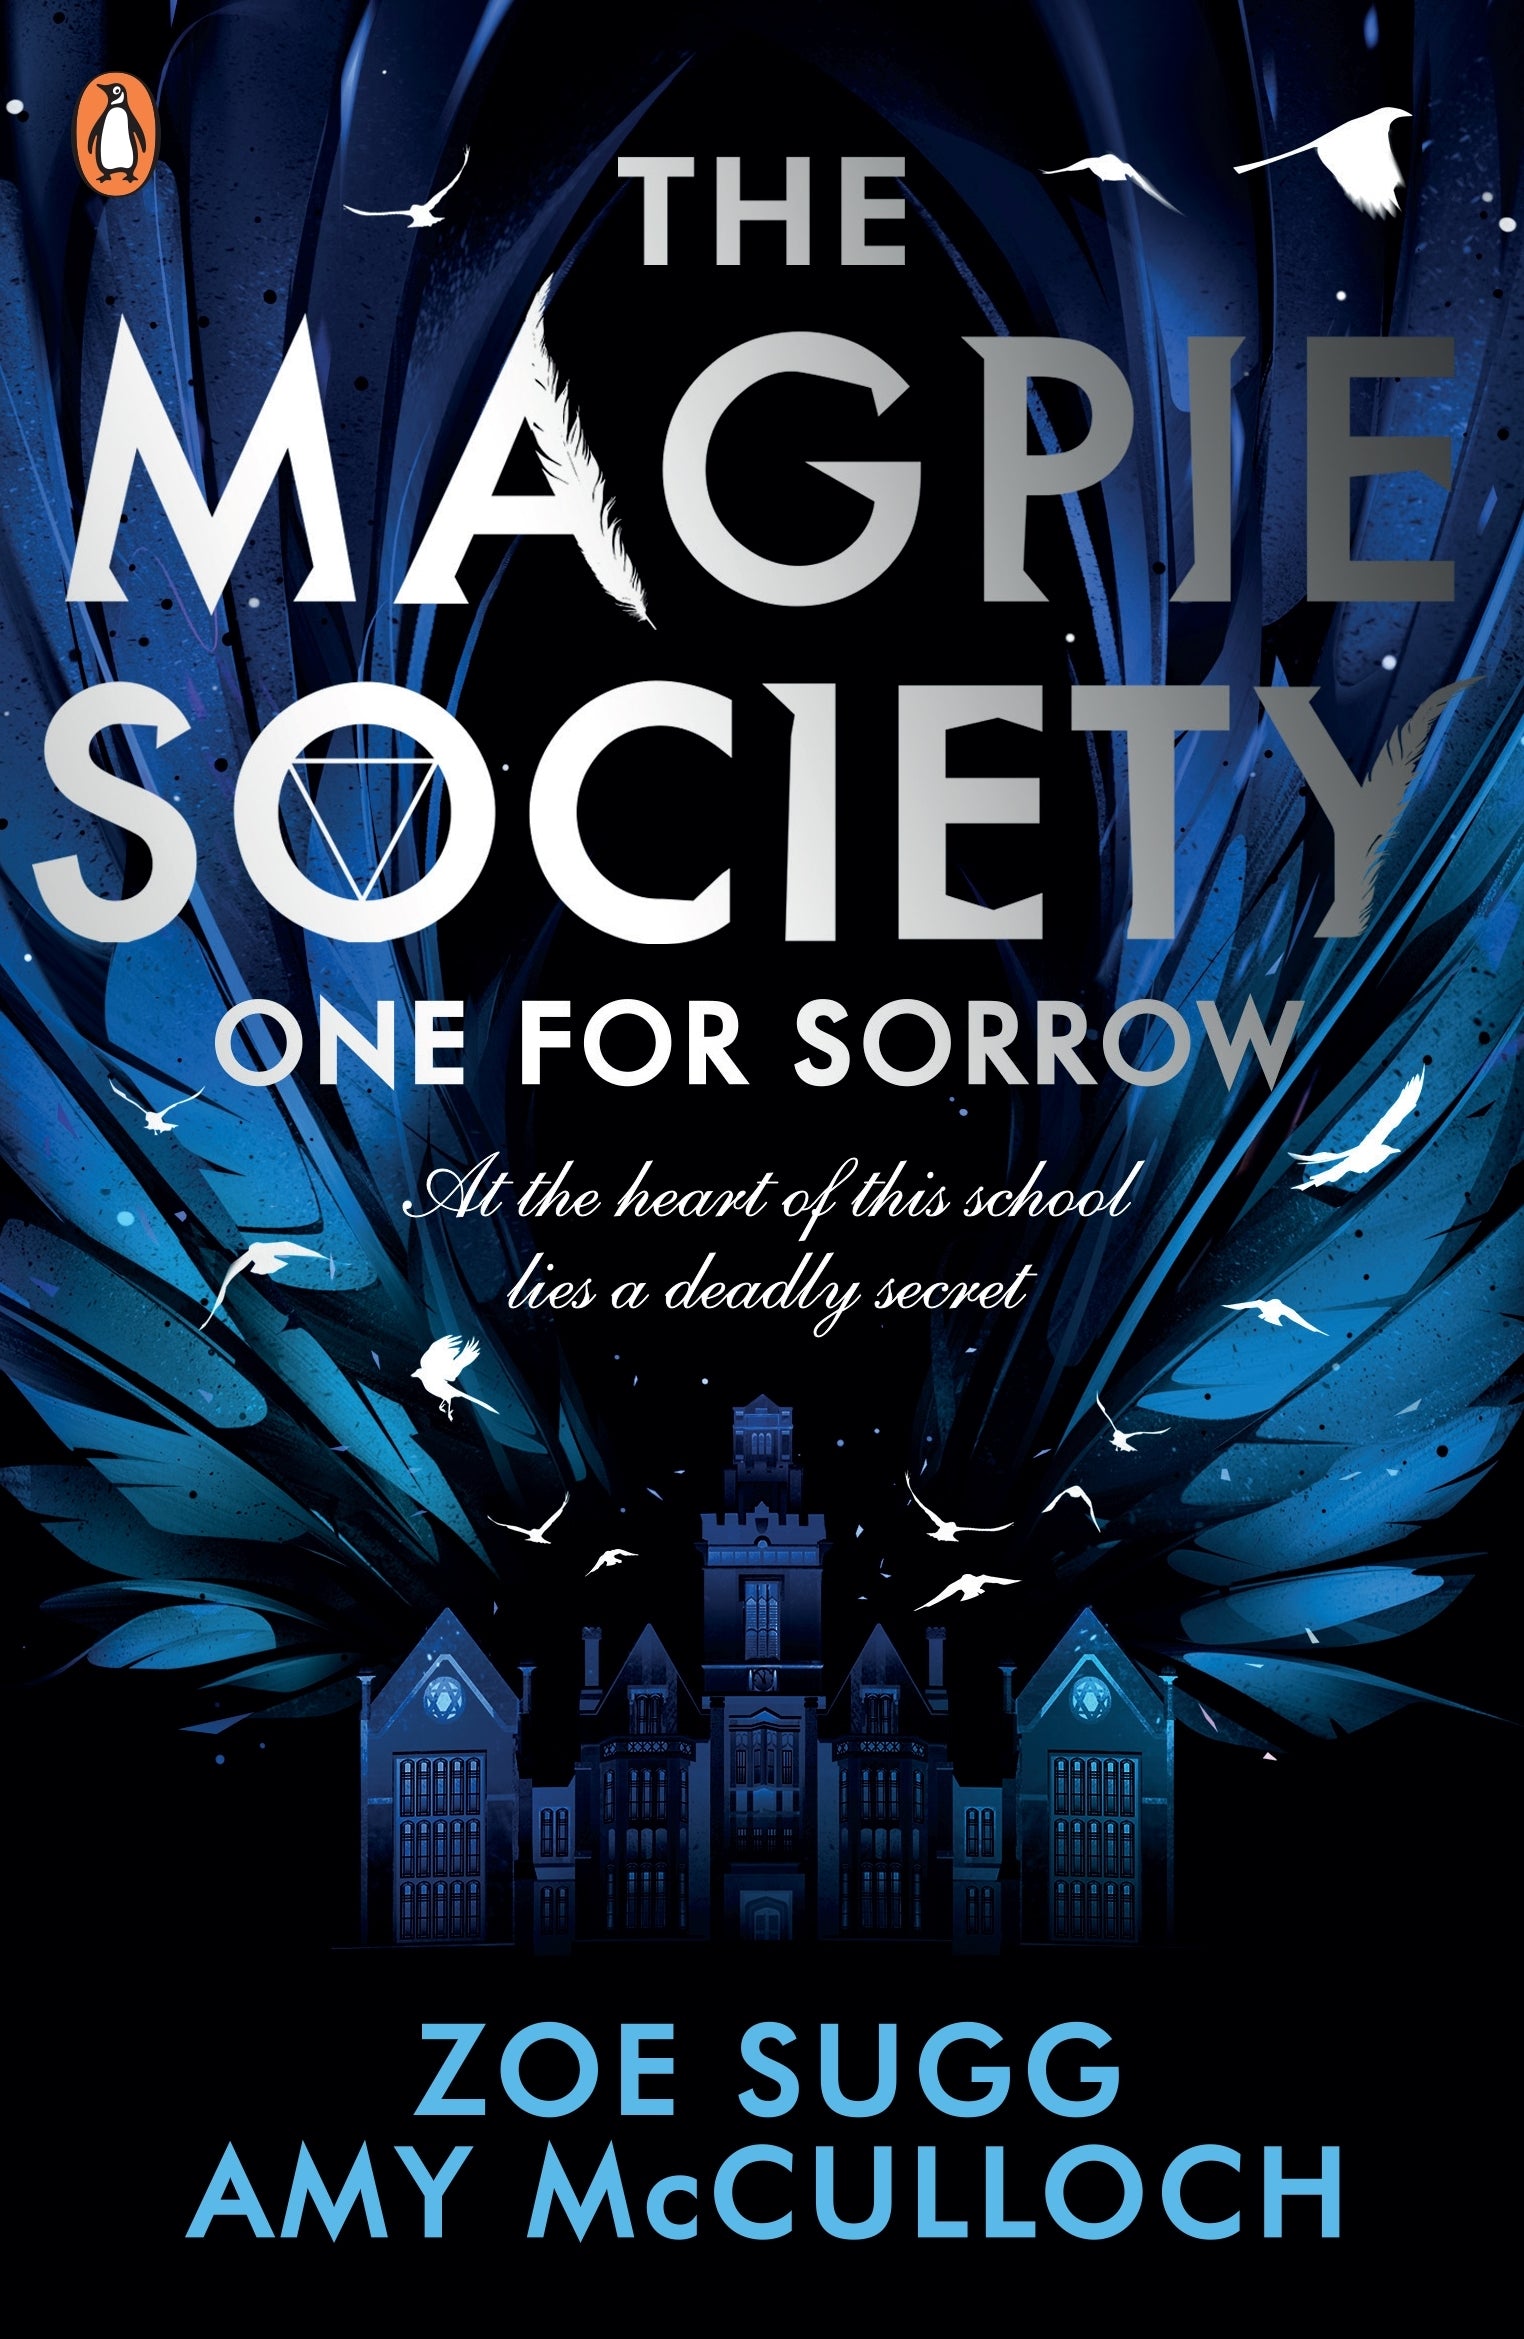 The Magpie Society Book#1: One for Sorrow By Zoe Sugg and Amy McCulloch